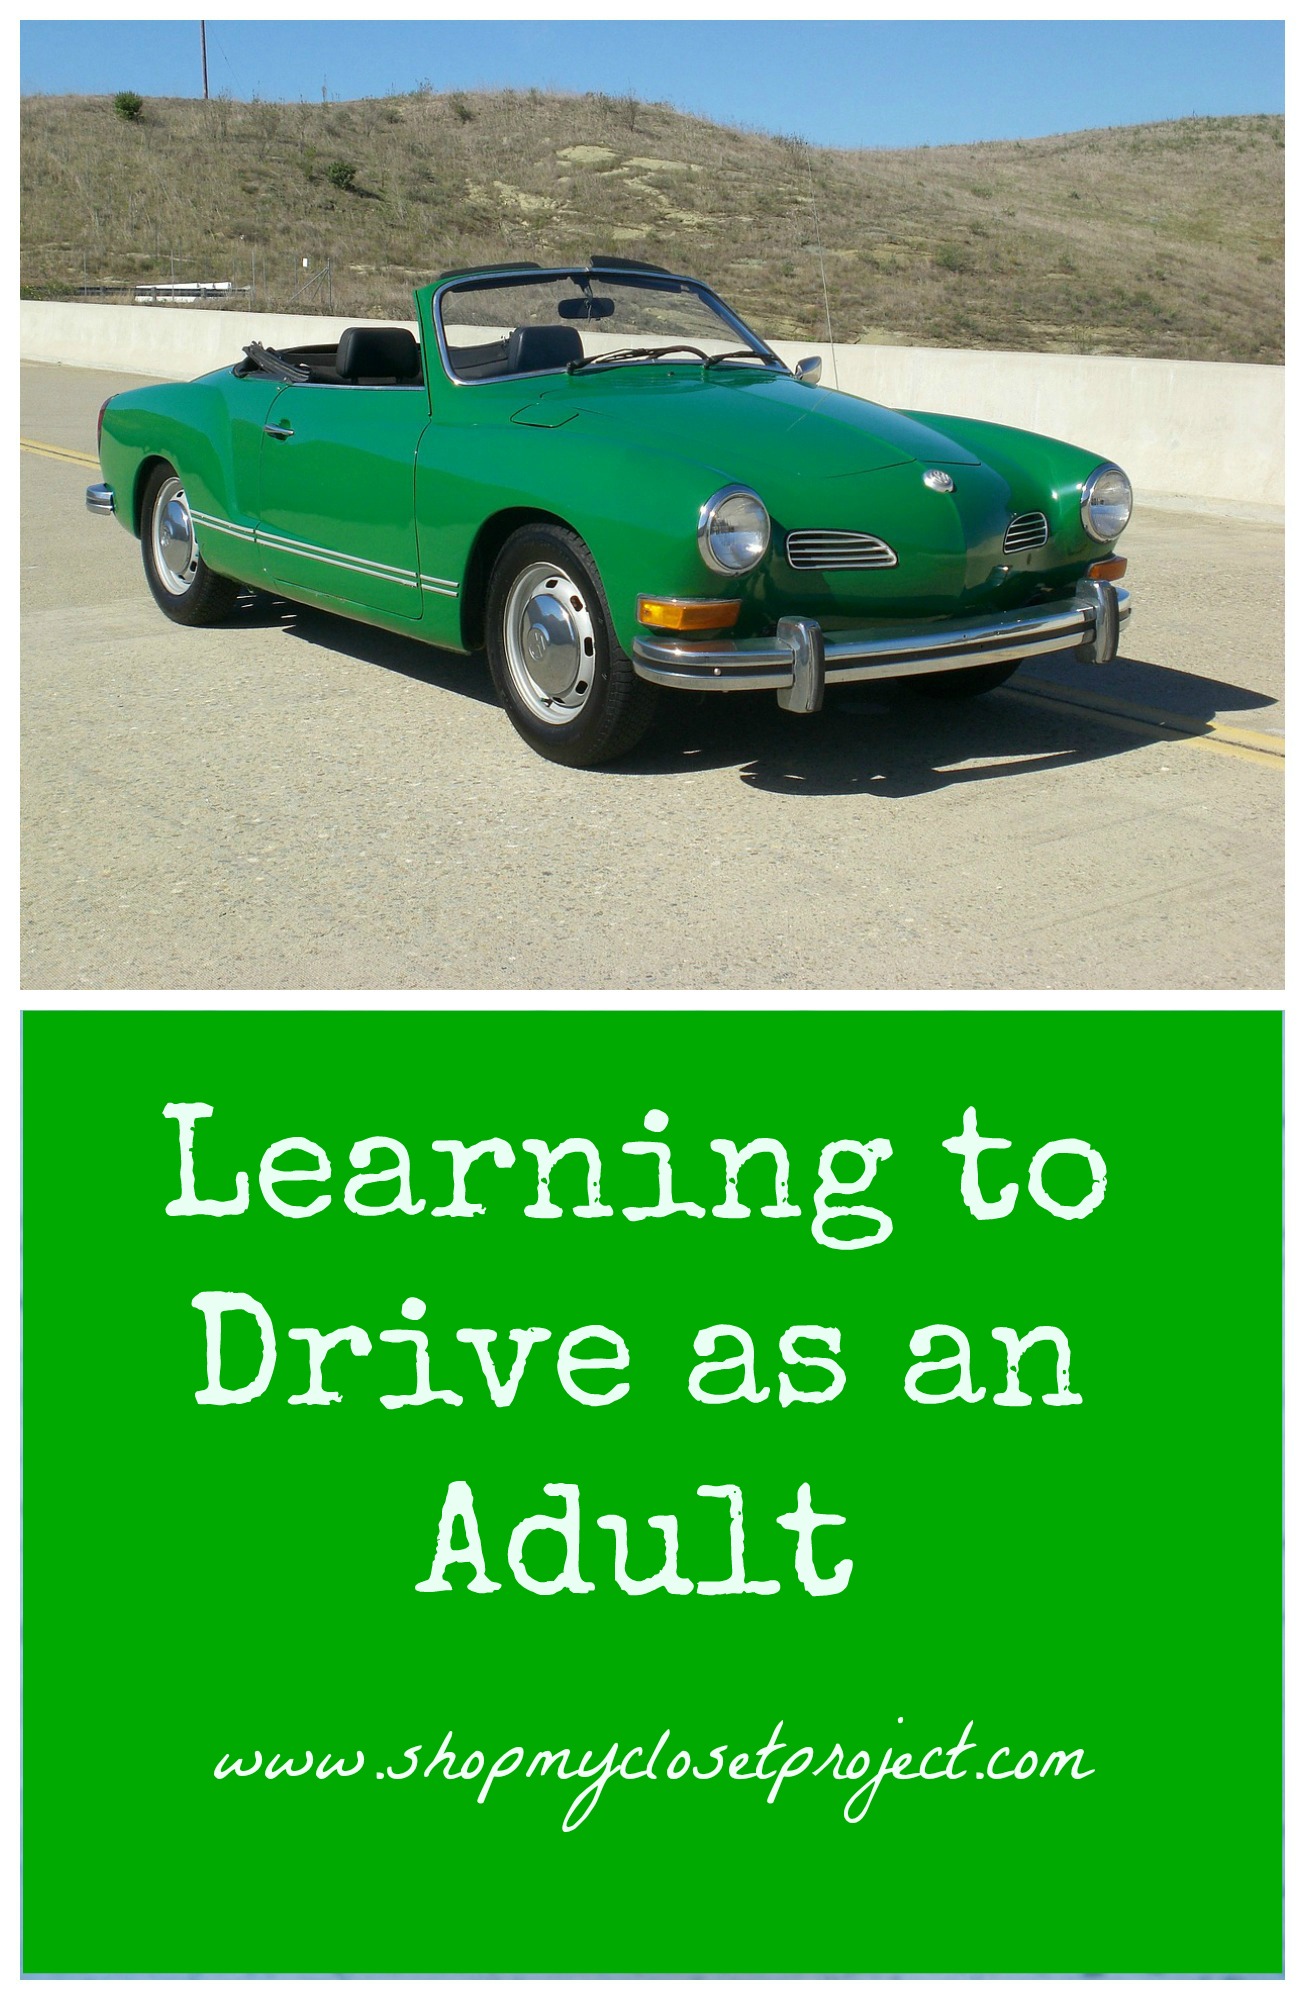 Learning to Drive As an Adult-Vroom Vroom